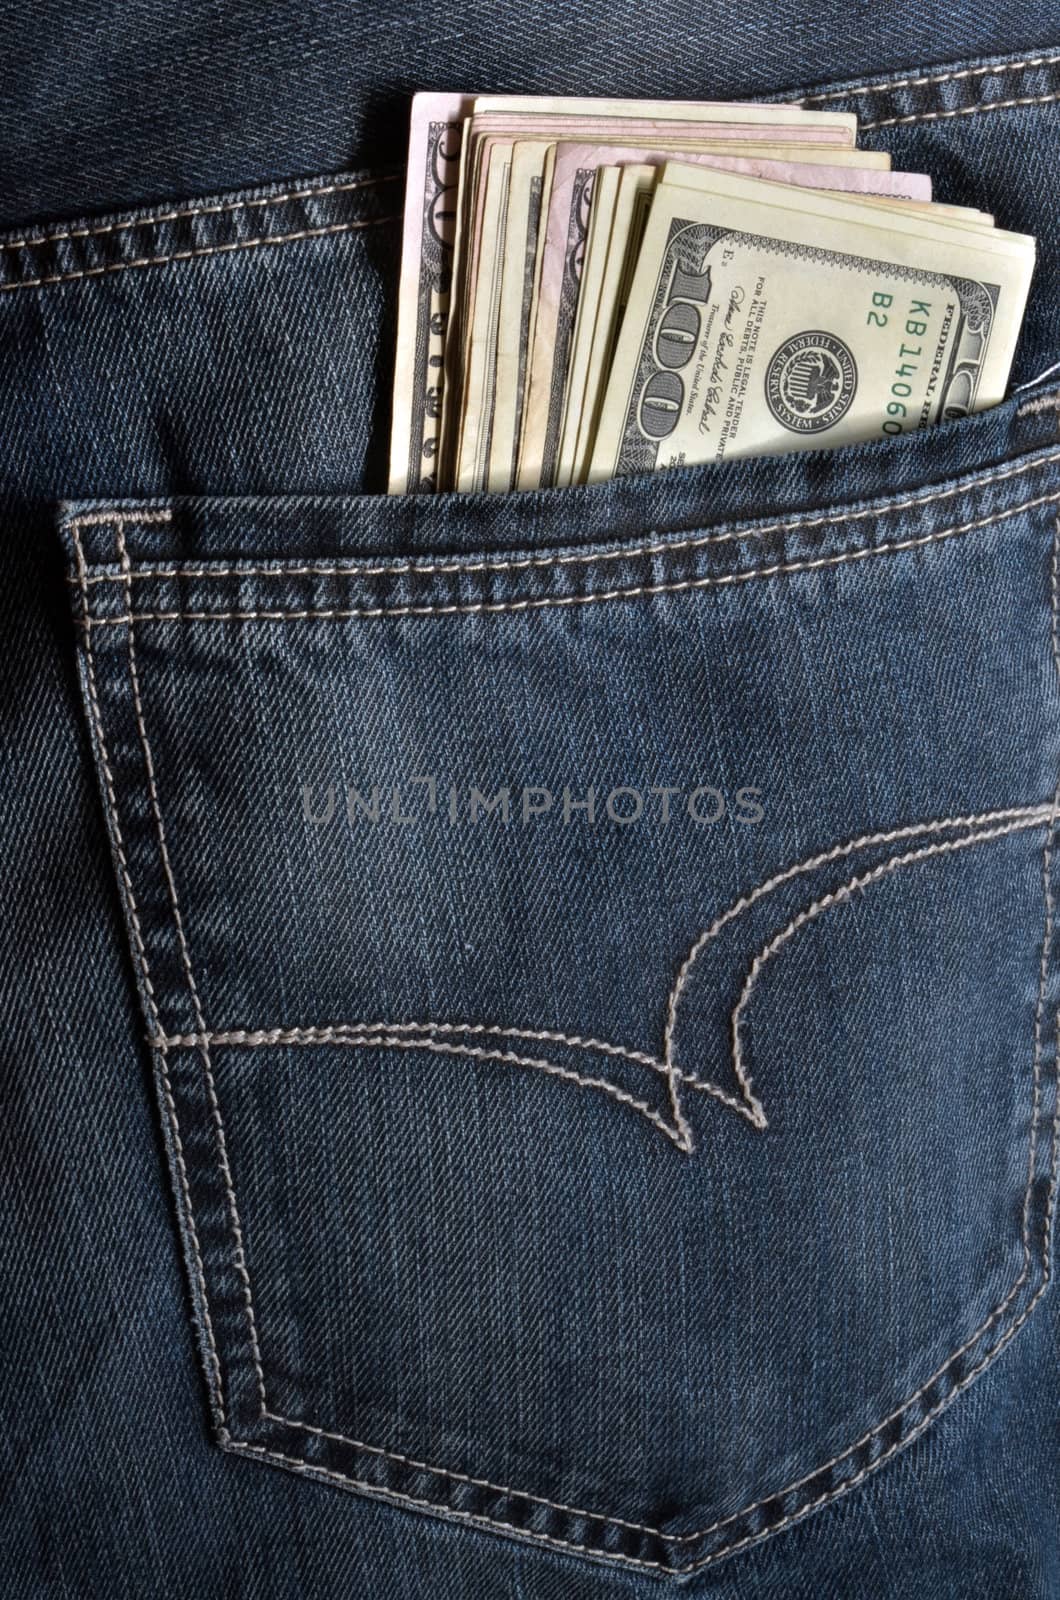 Jeans pocket with few hundreds american dollars.